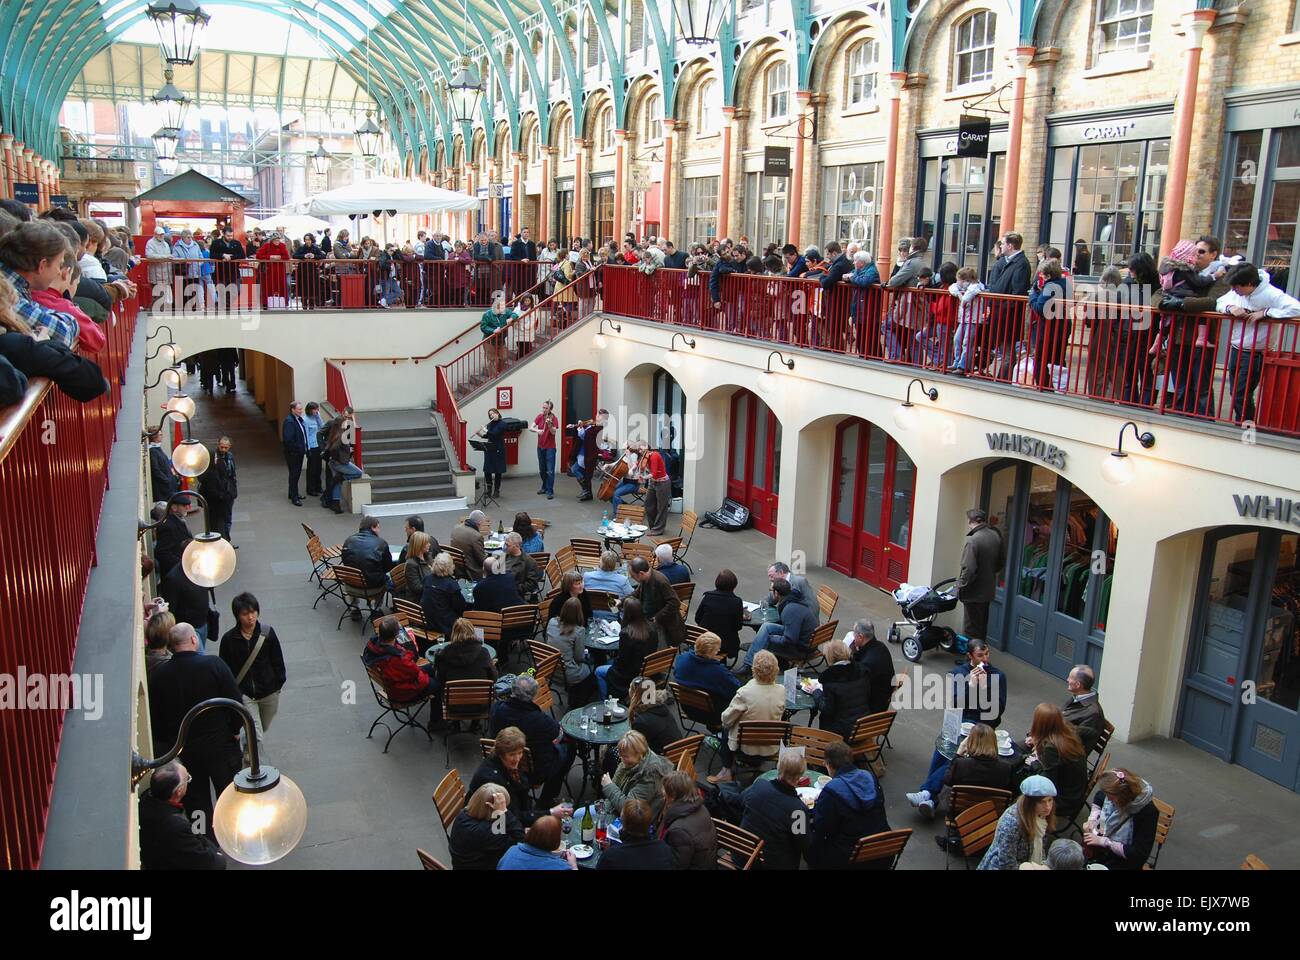 Bustling Covent Garden Indoor Market with a band playing for cafe customers and shoppers, London Stock Photo